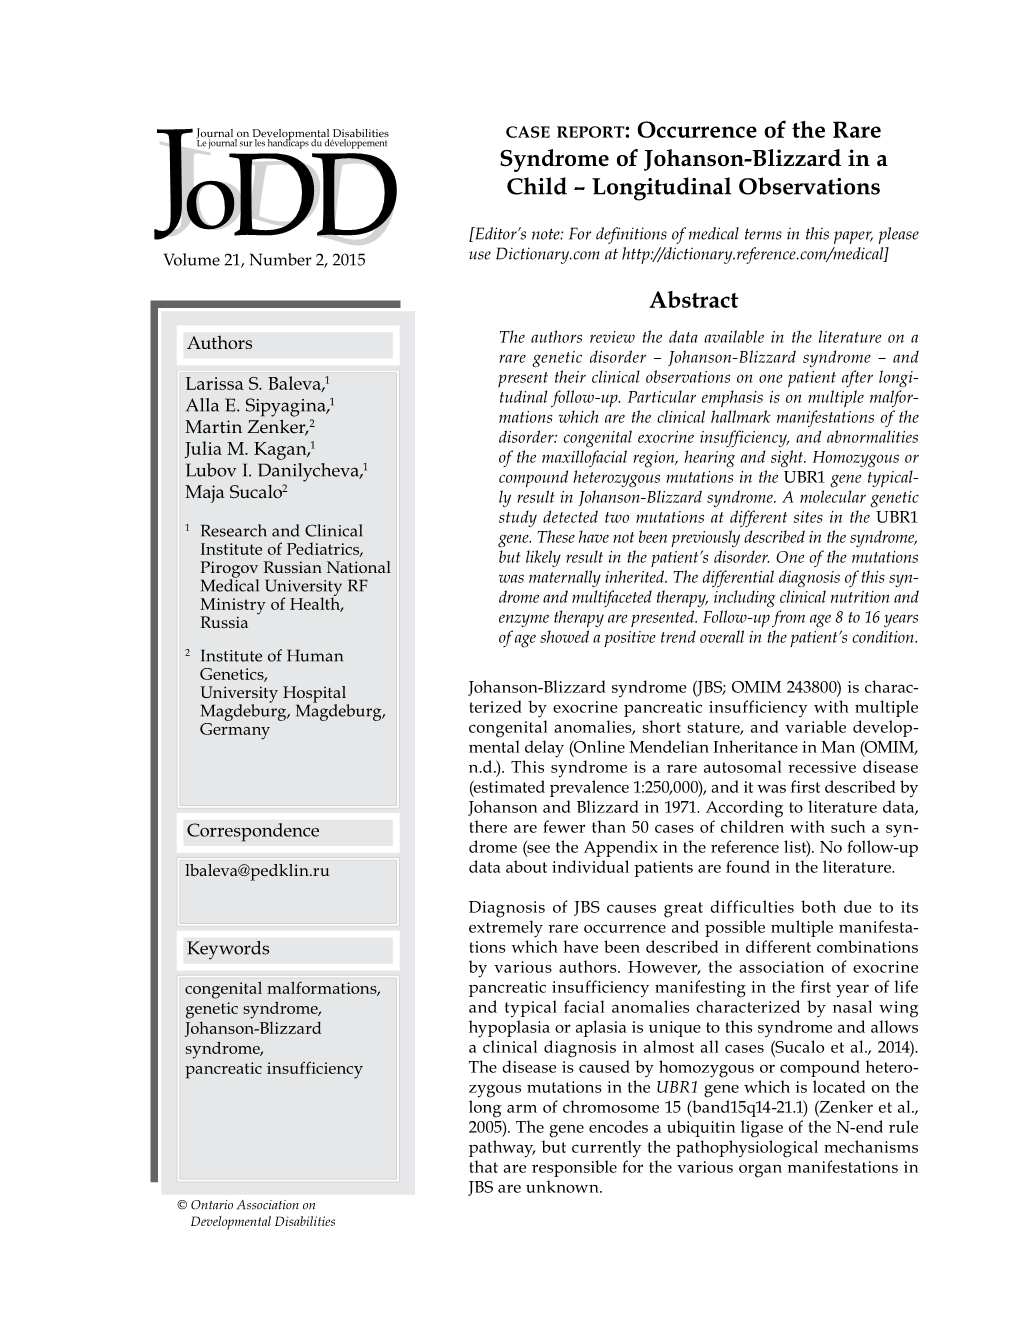 Occurrence of the Rare Syndrome of Johanson-Blizzard in a Child – Longitudinal Observations